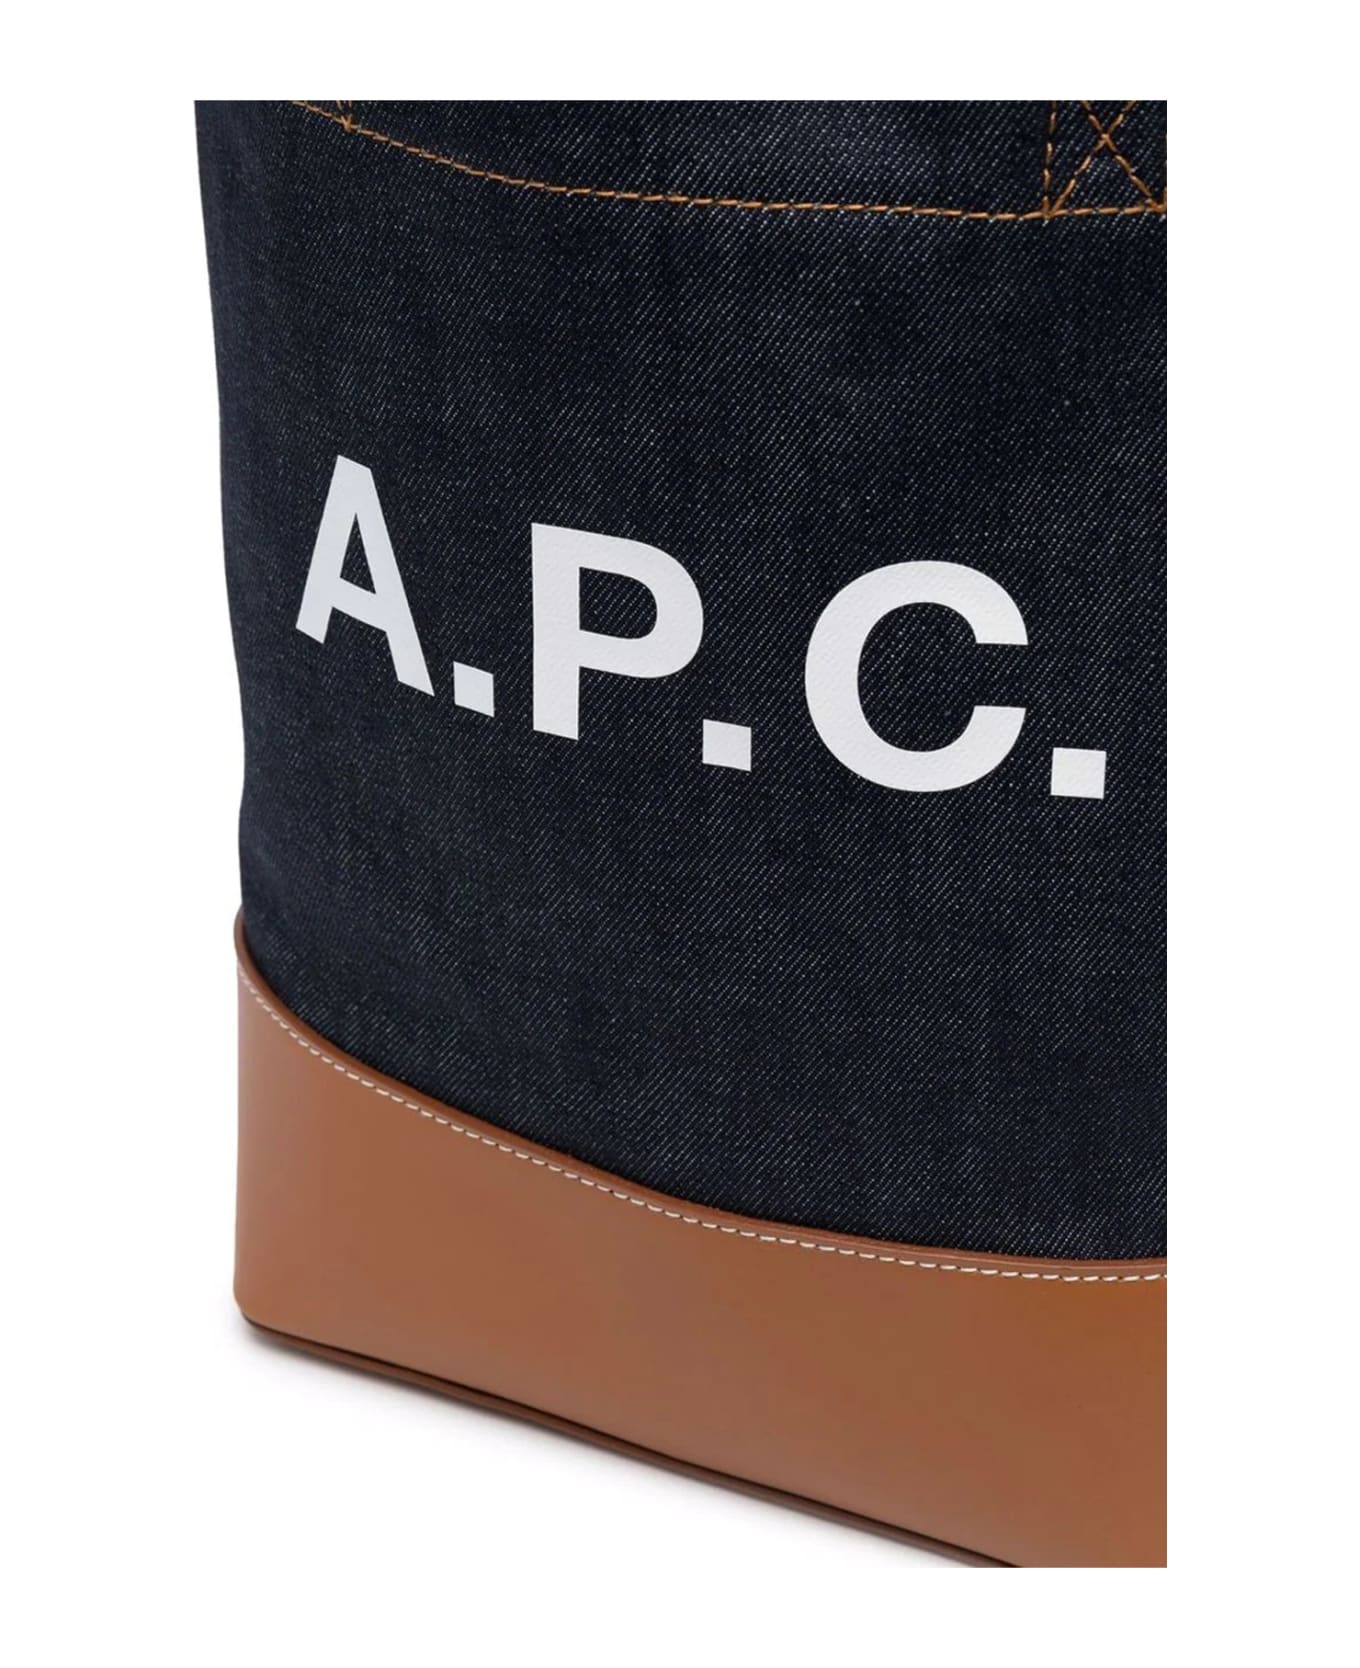 A.P.C. Tote Axel Small | italist